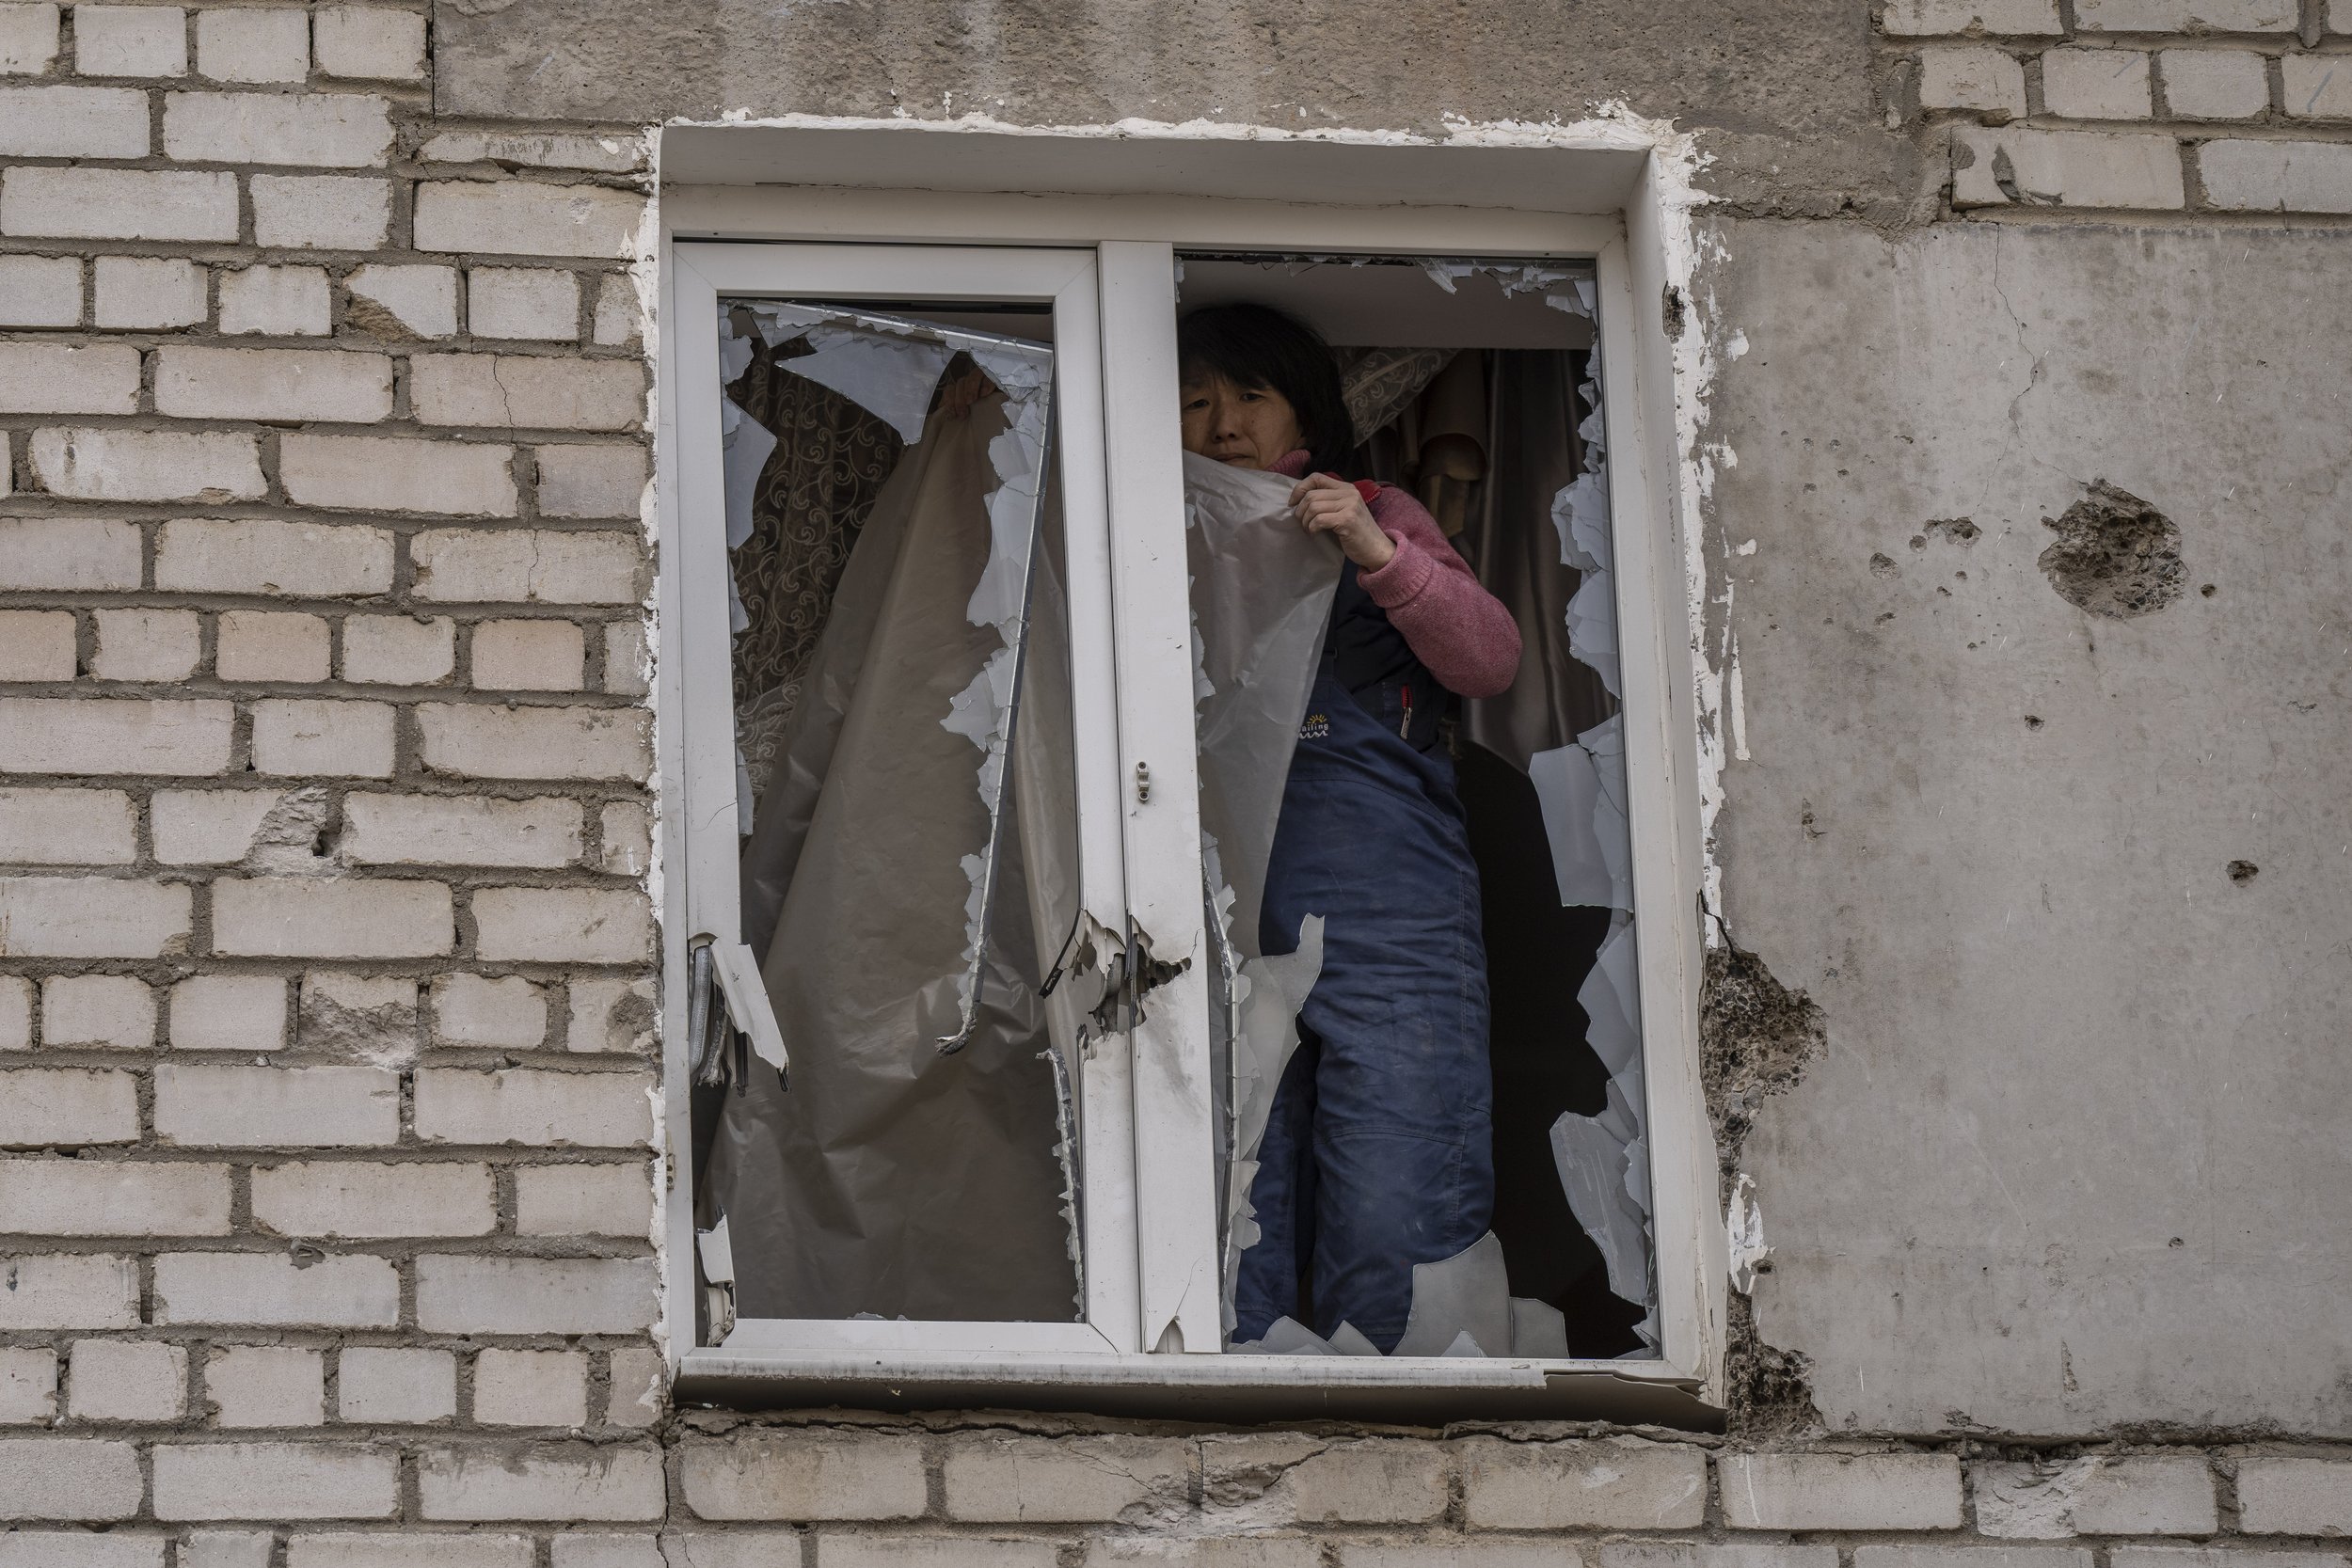  A woman places plastic over her damaged window after a Russian attack on the previous night, in the residential area of Mikolaiv, Ukraine, on Tuesday, March 29, 2022. (AP Photo/Petros Giannakouris) 